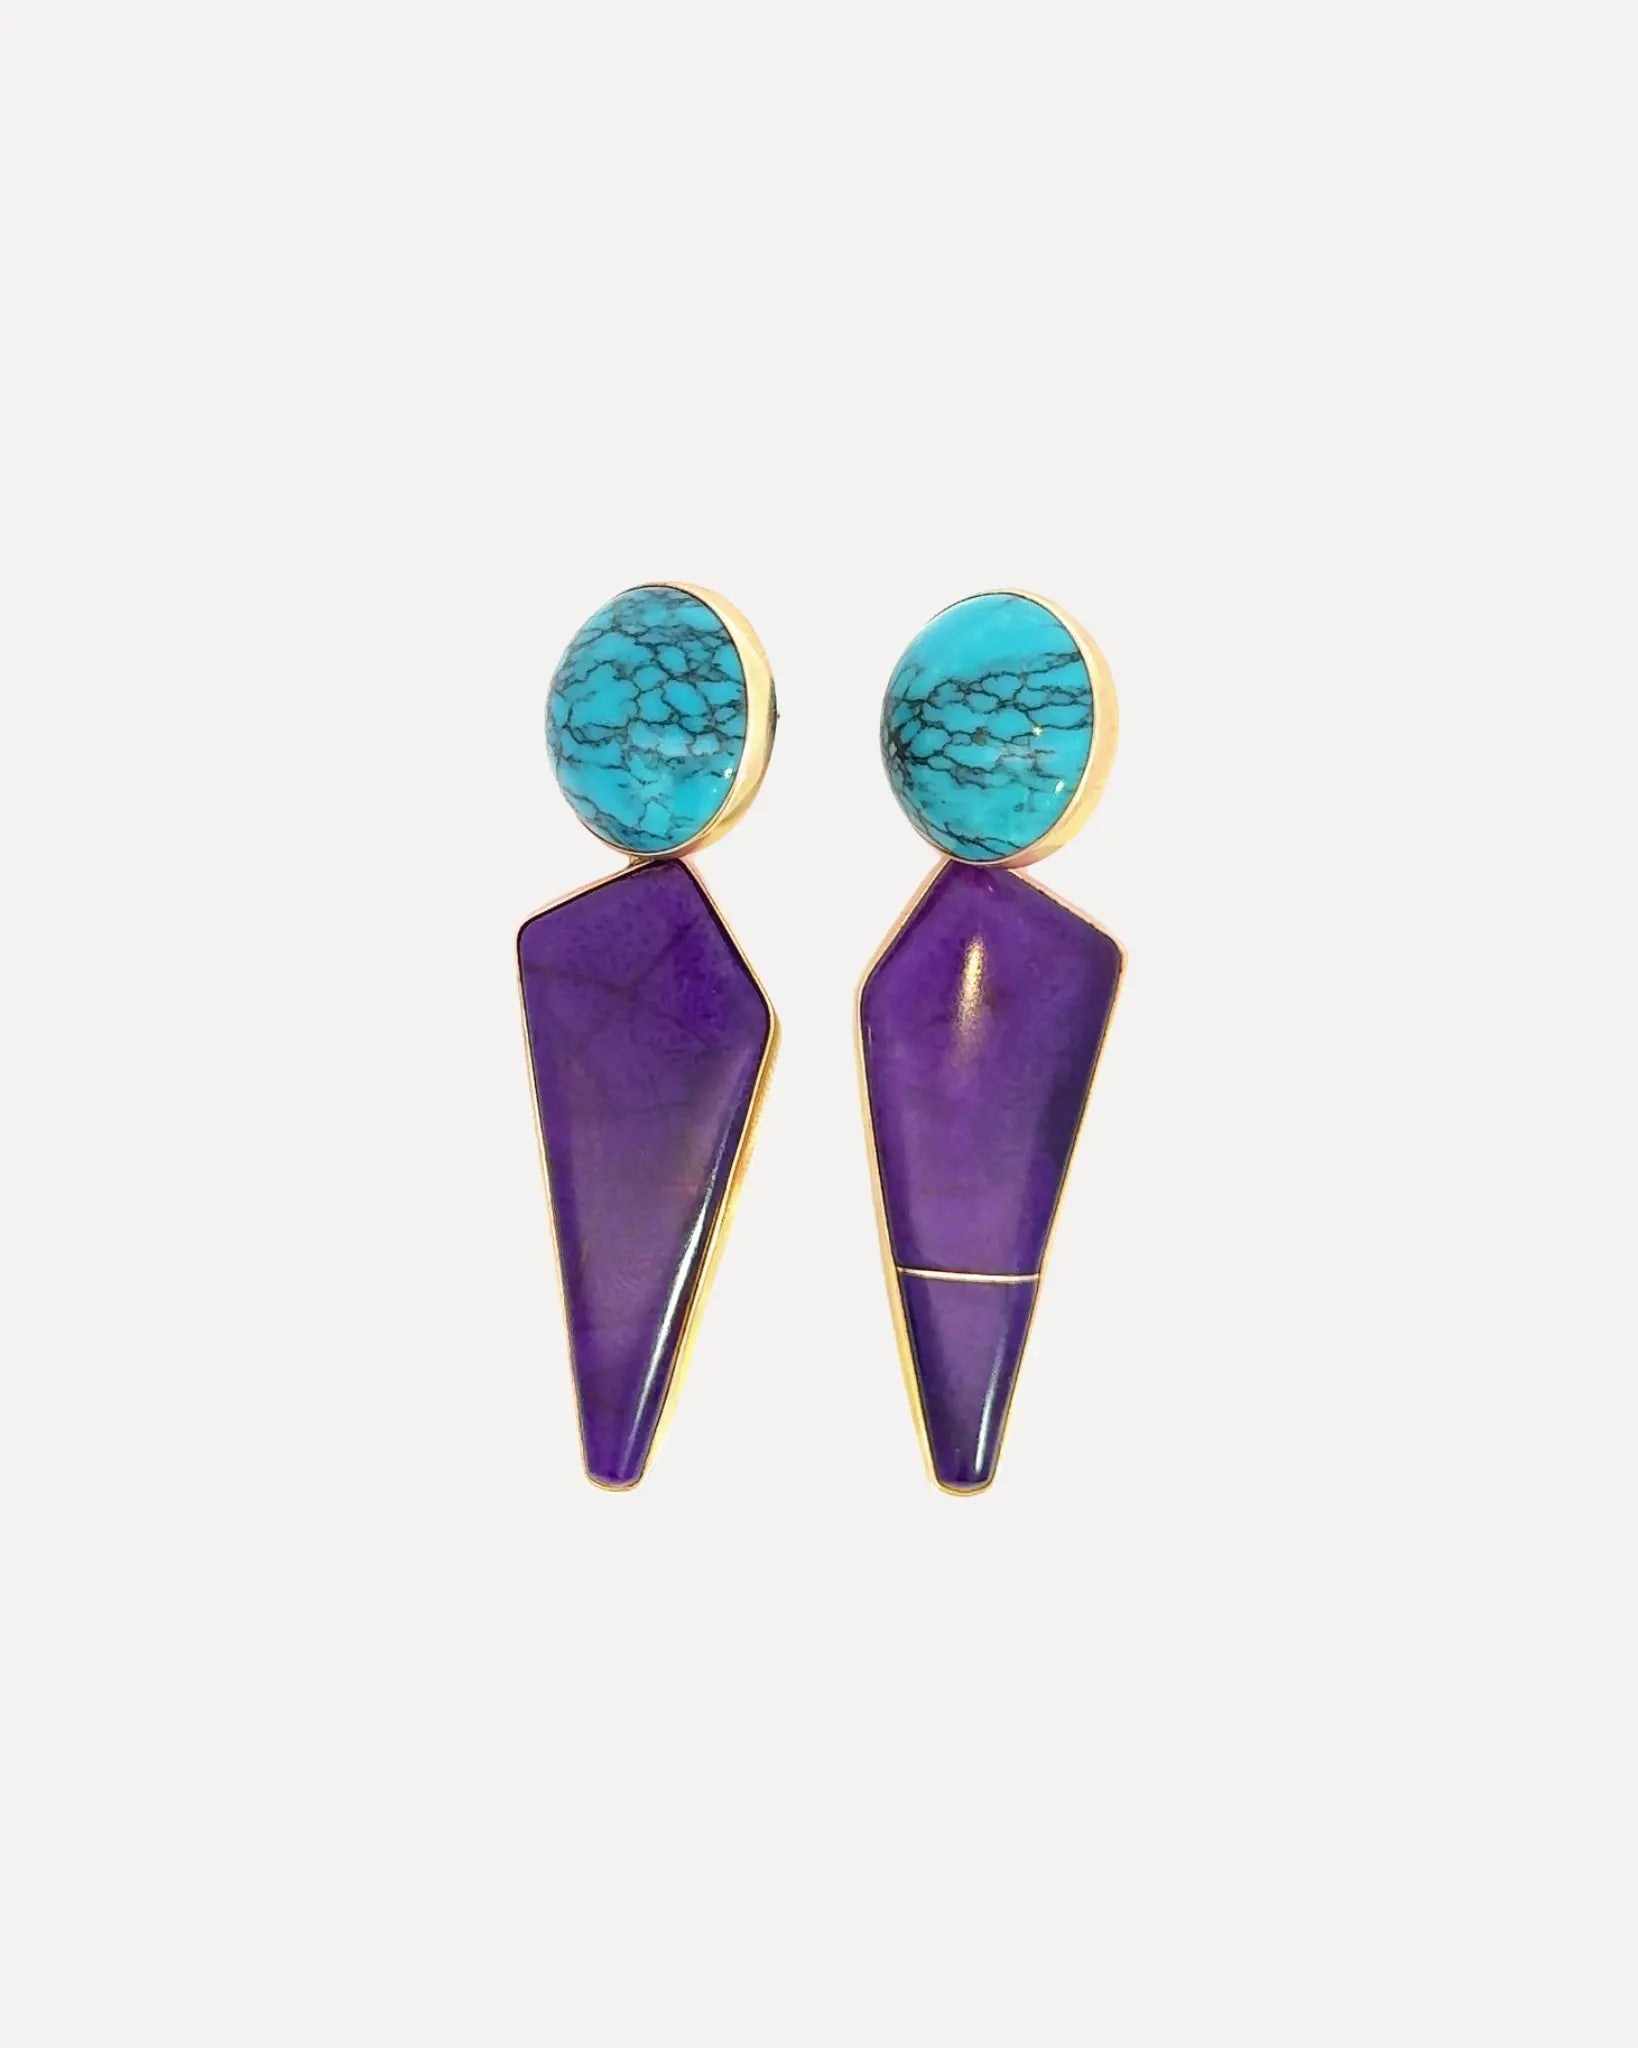 Sugilite and Turquoise Modern Earrings Sugilite and Turquoise Modern Earrings Vintage at the Squash Blossom Vintage at the Squash Blossom  Squash Blossom Vail